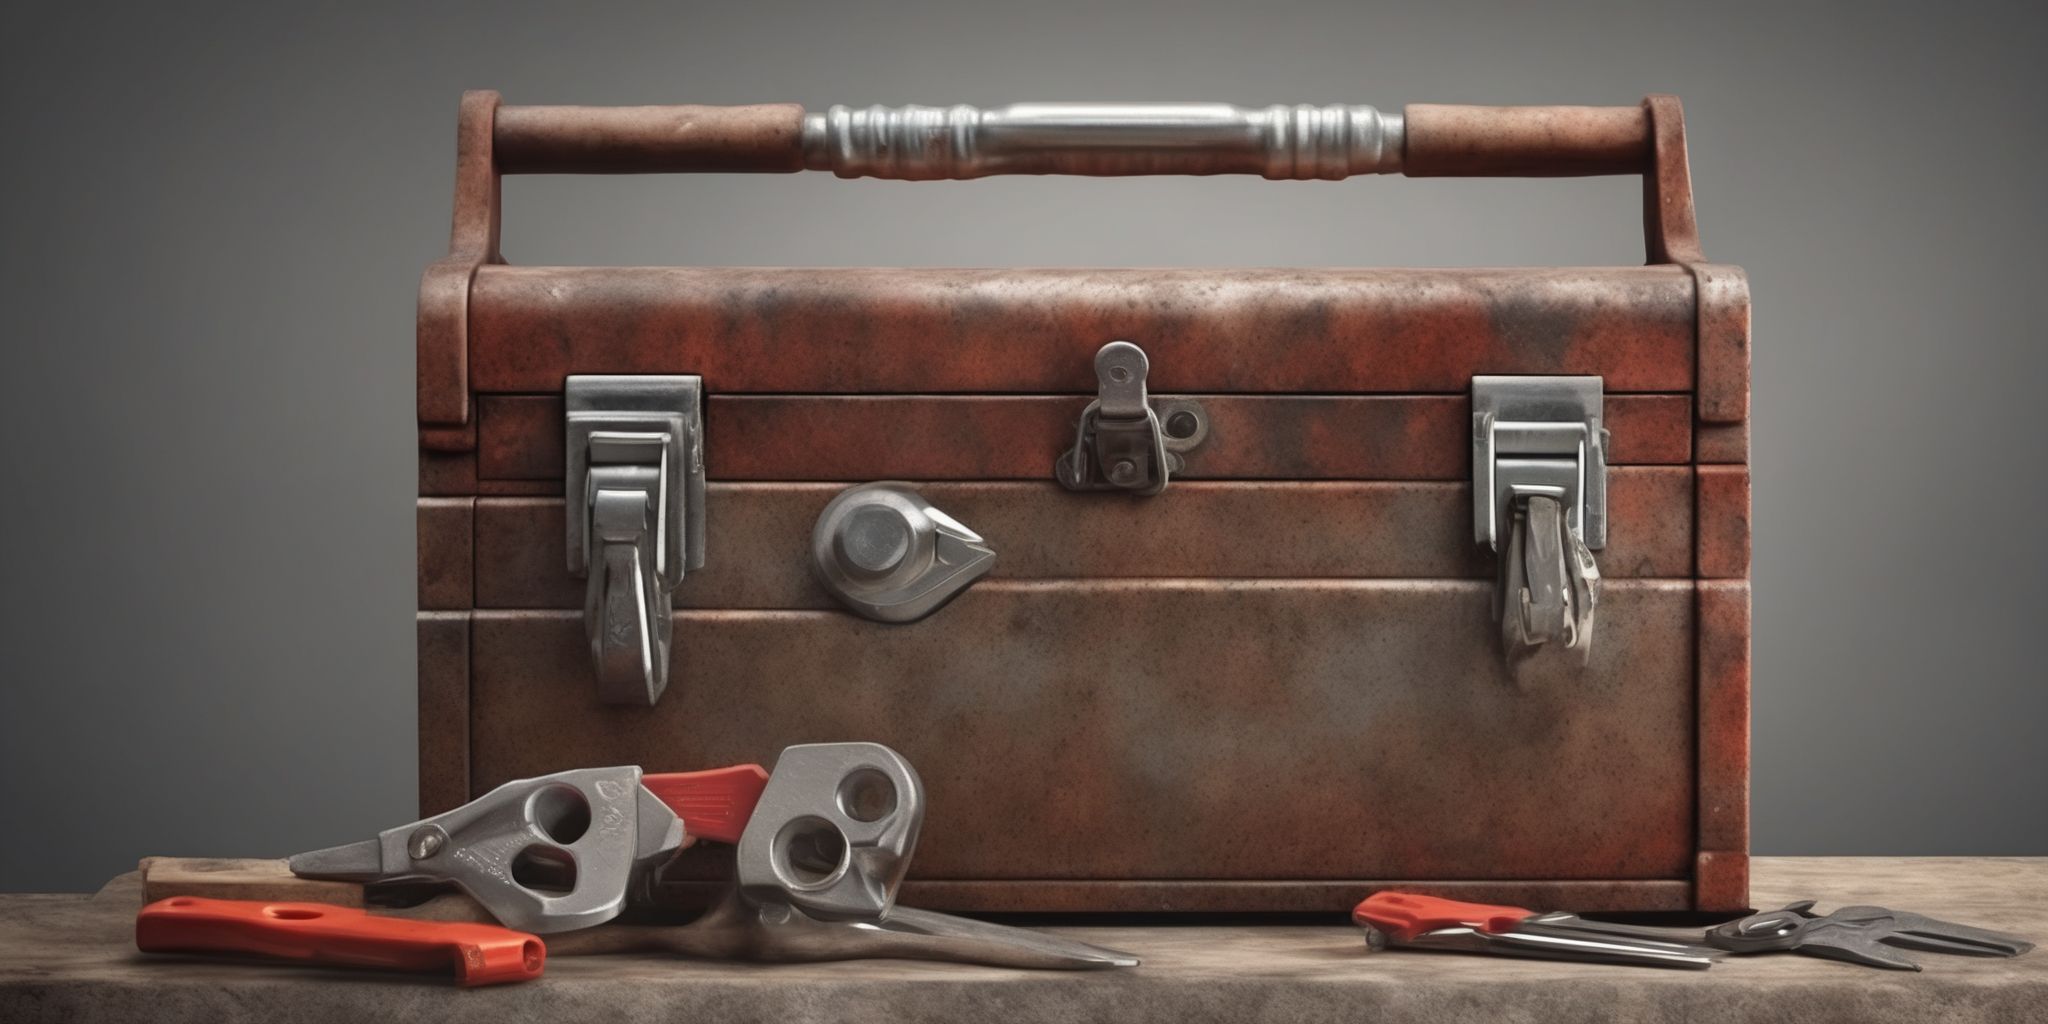 Toolbox  in realistic, photographic style